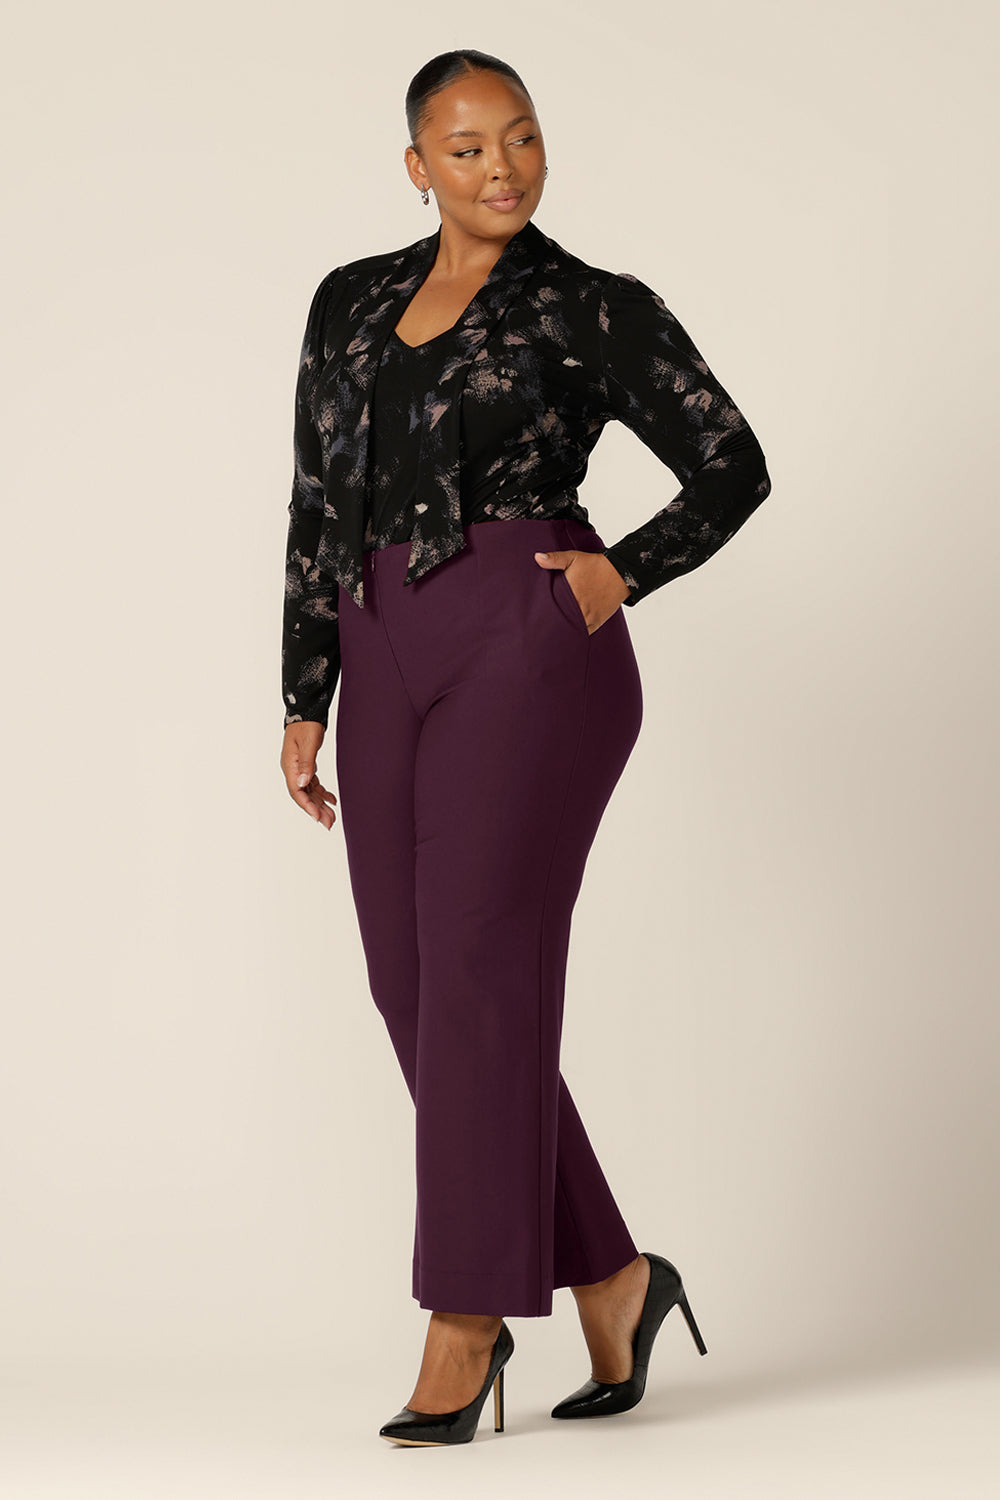 A fuller figure woman wears a long sleeve, V-neck top with tie neck detail in size 18 with flared leg, tailored pants in Mulberry. Both are by Australian and New Zealand women's clothing brand, L&F and are available to shop in an inclusive size range of sizes 8 to 24.